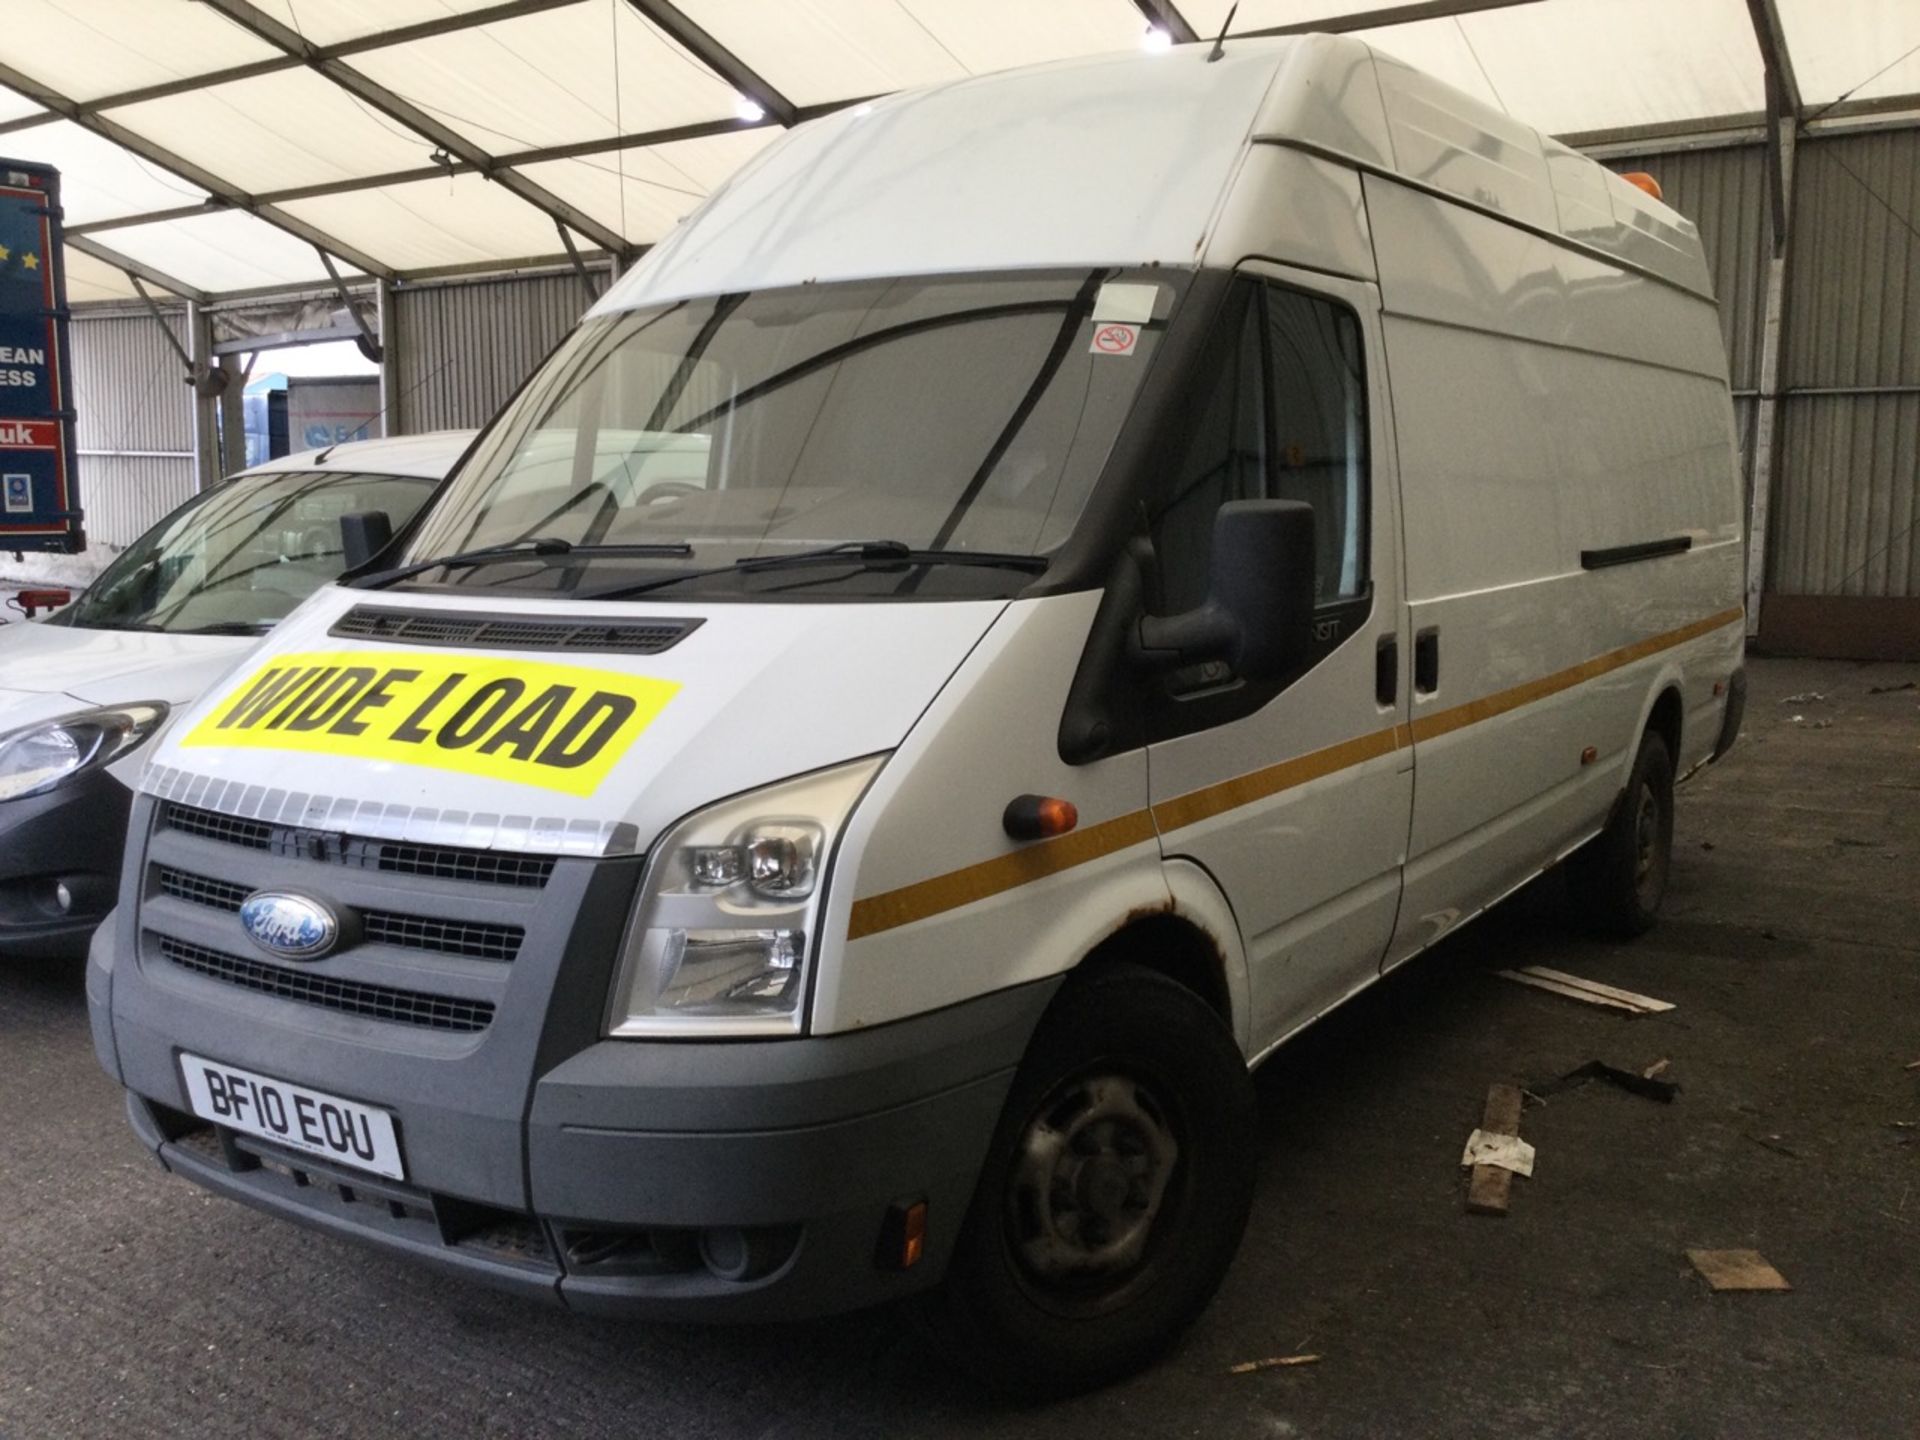 Ford TRANSIT 100 T350L Panel Van Escort Vehicle, Registration number BF10EOU , year 2010. Note - No